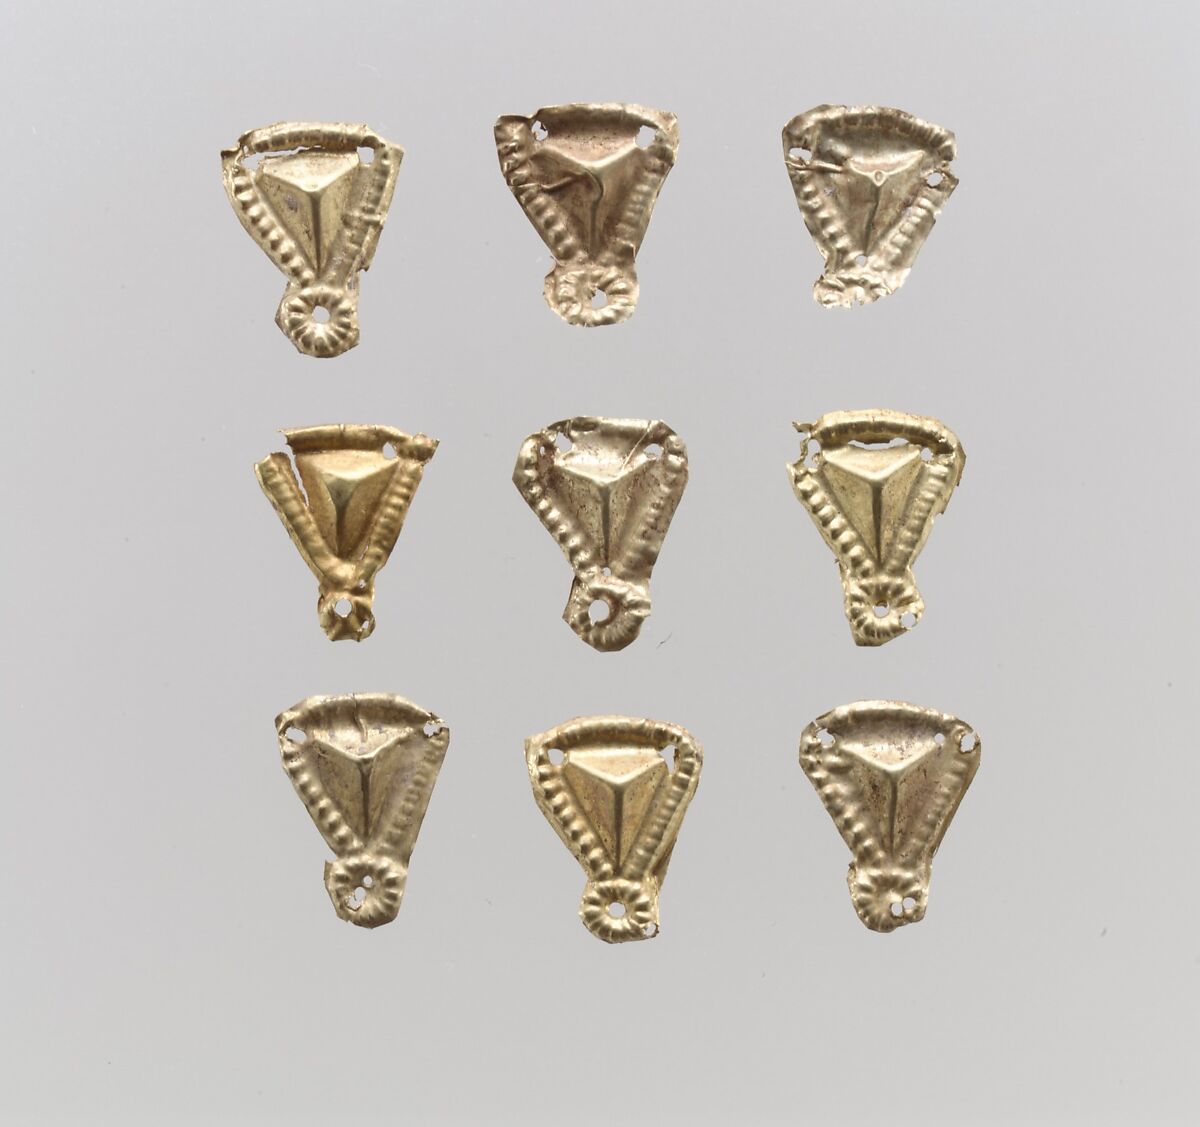 Bead ornaments, triangular, 57, Gold, East Germanic or nomadic (?) 